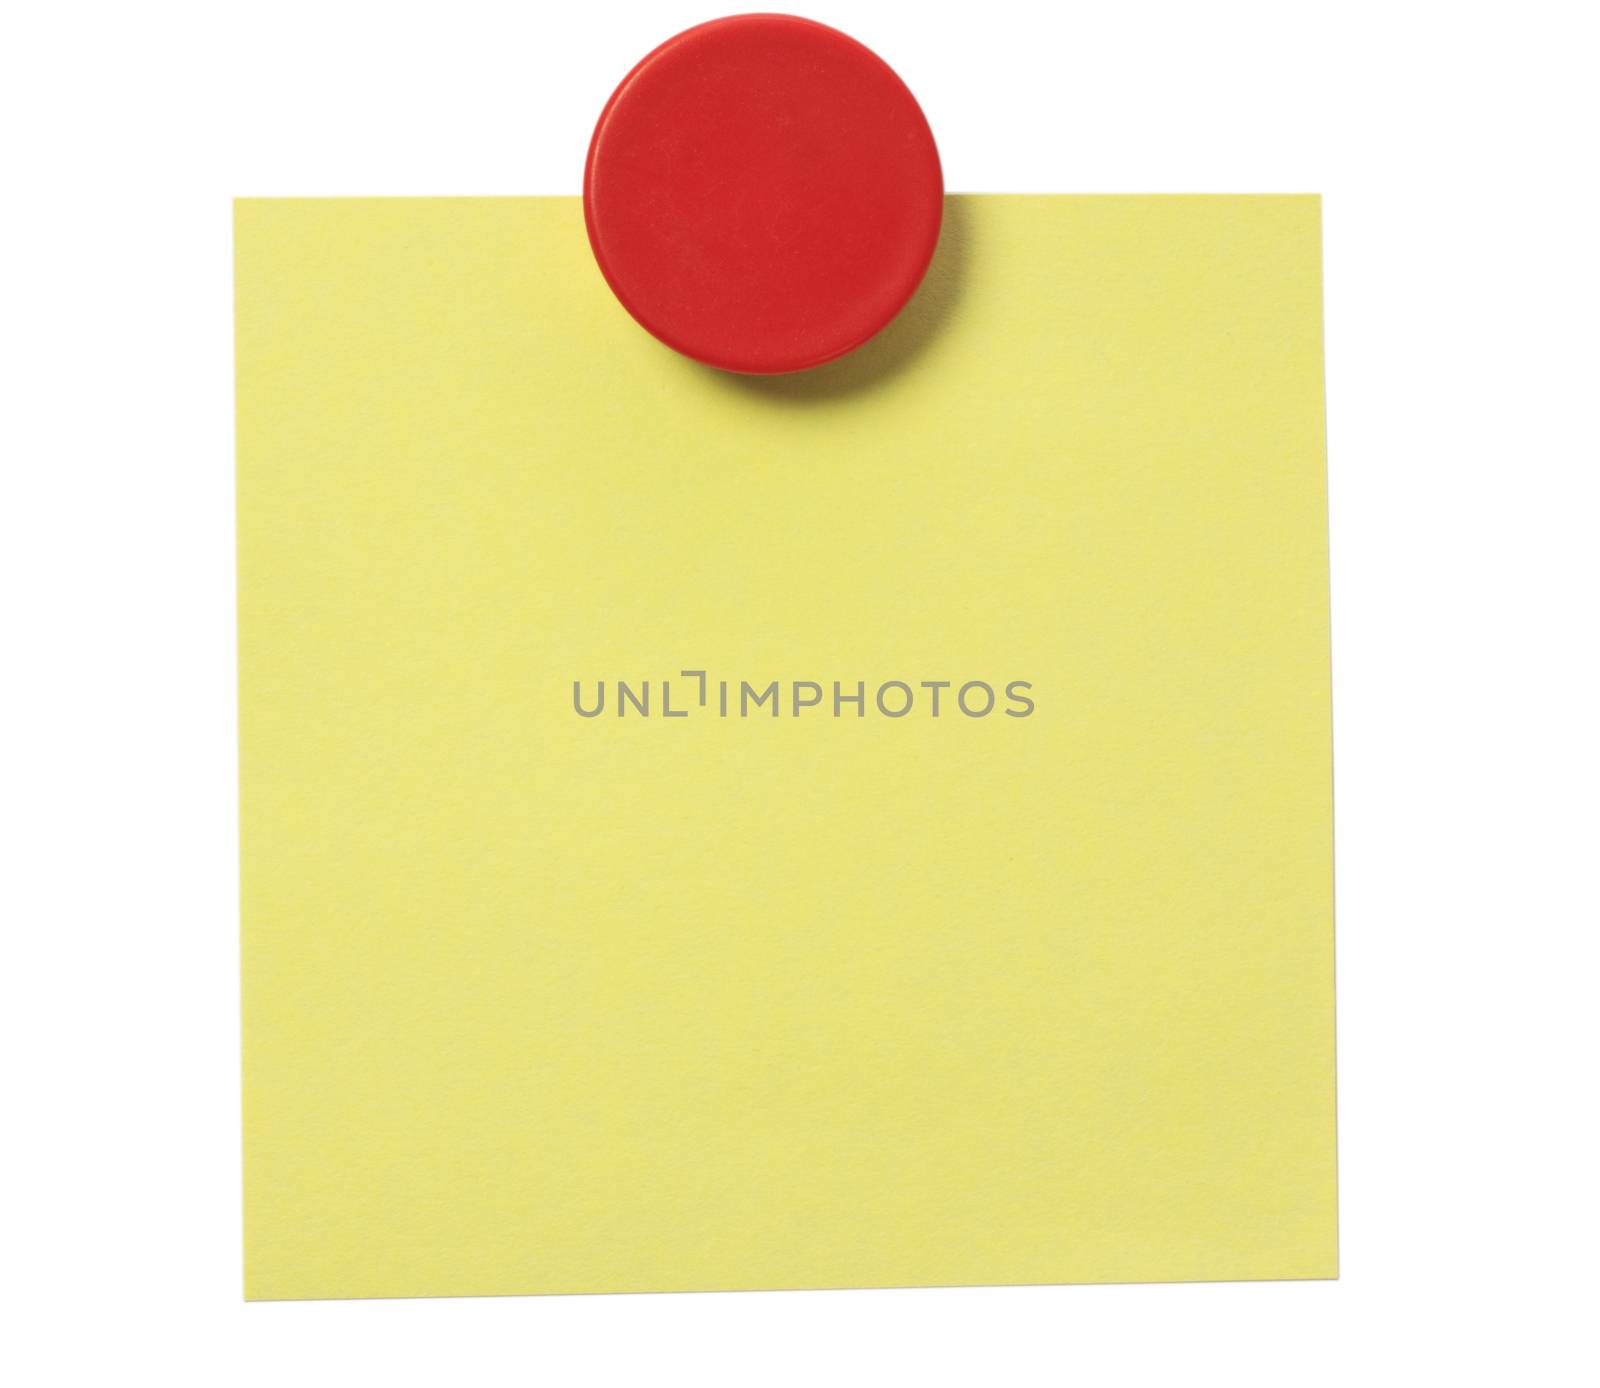 Yellow adhesive note and red magnet button on whiteboard.